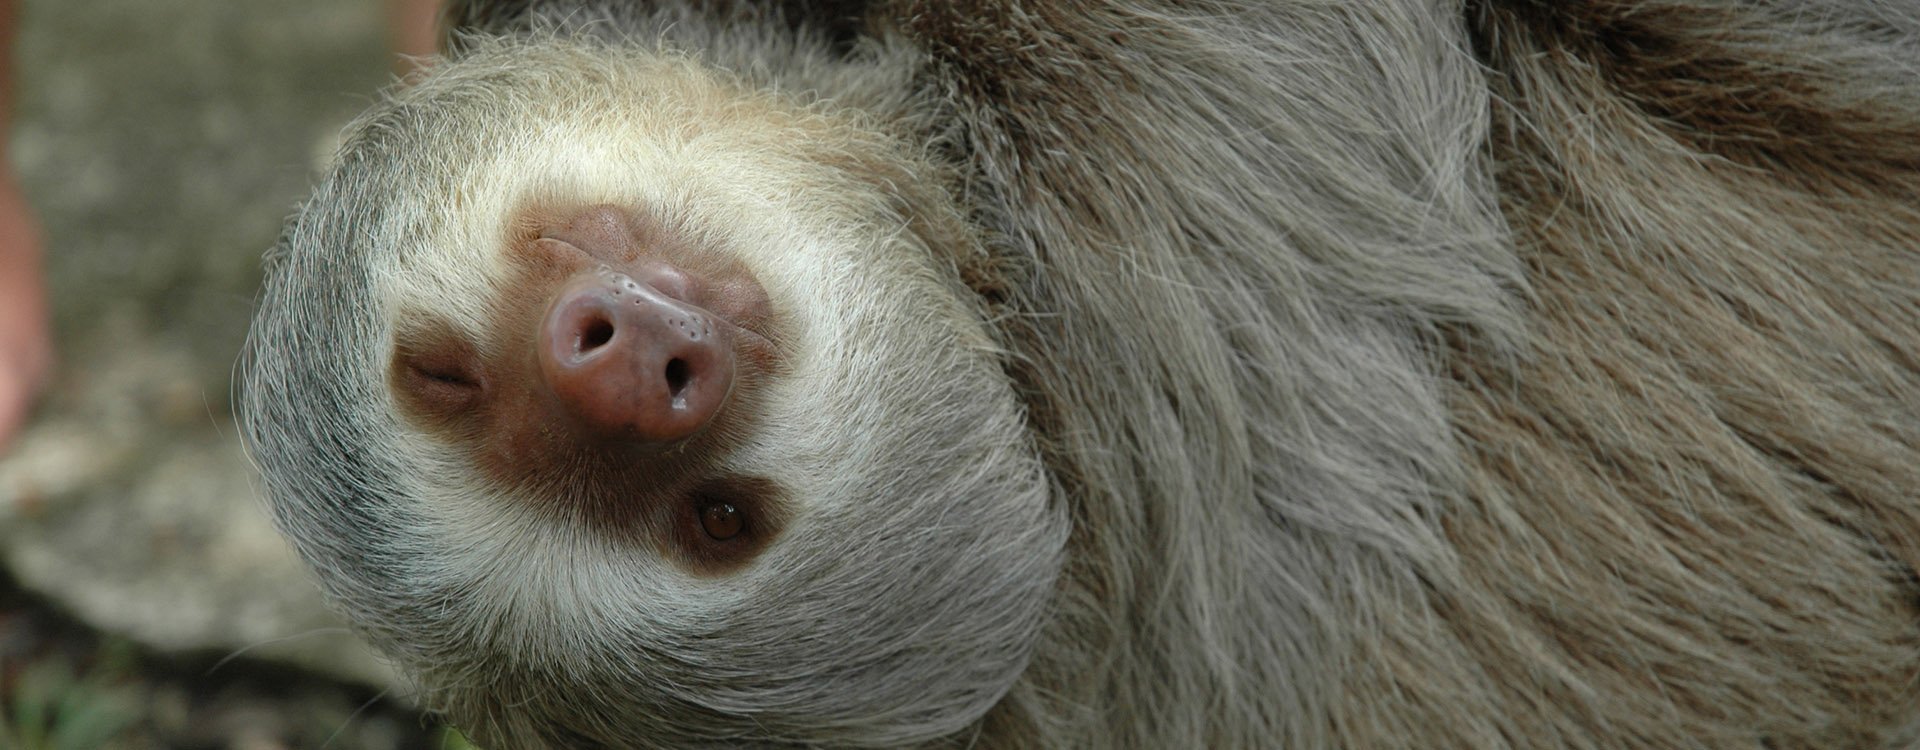 A three toed sloth giving a wink as he hangs from a branch, Osa Peninsula, Costa Rica